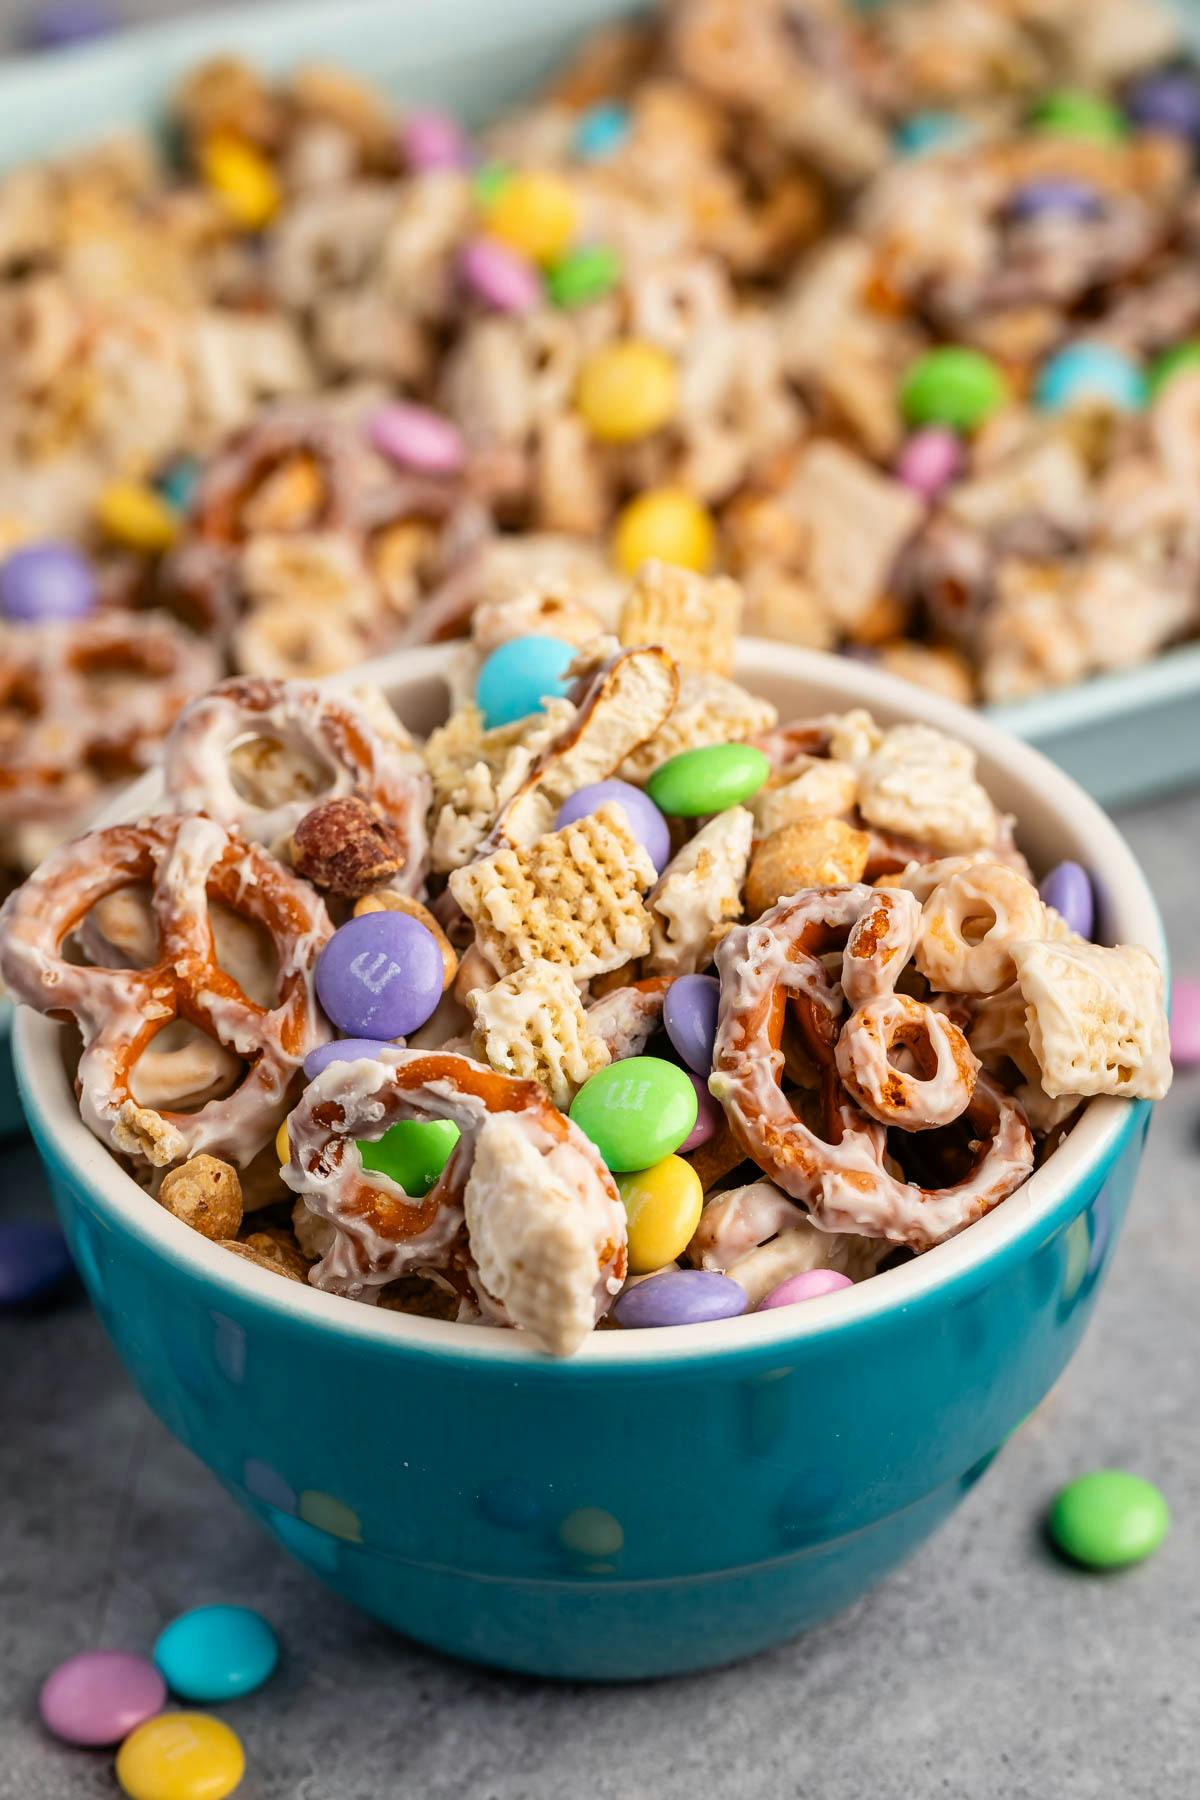 snack mix with pretzels and chocolate candy in a teal bowl.